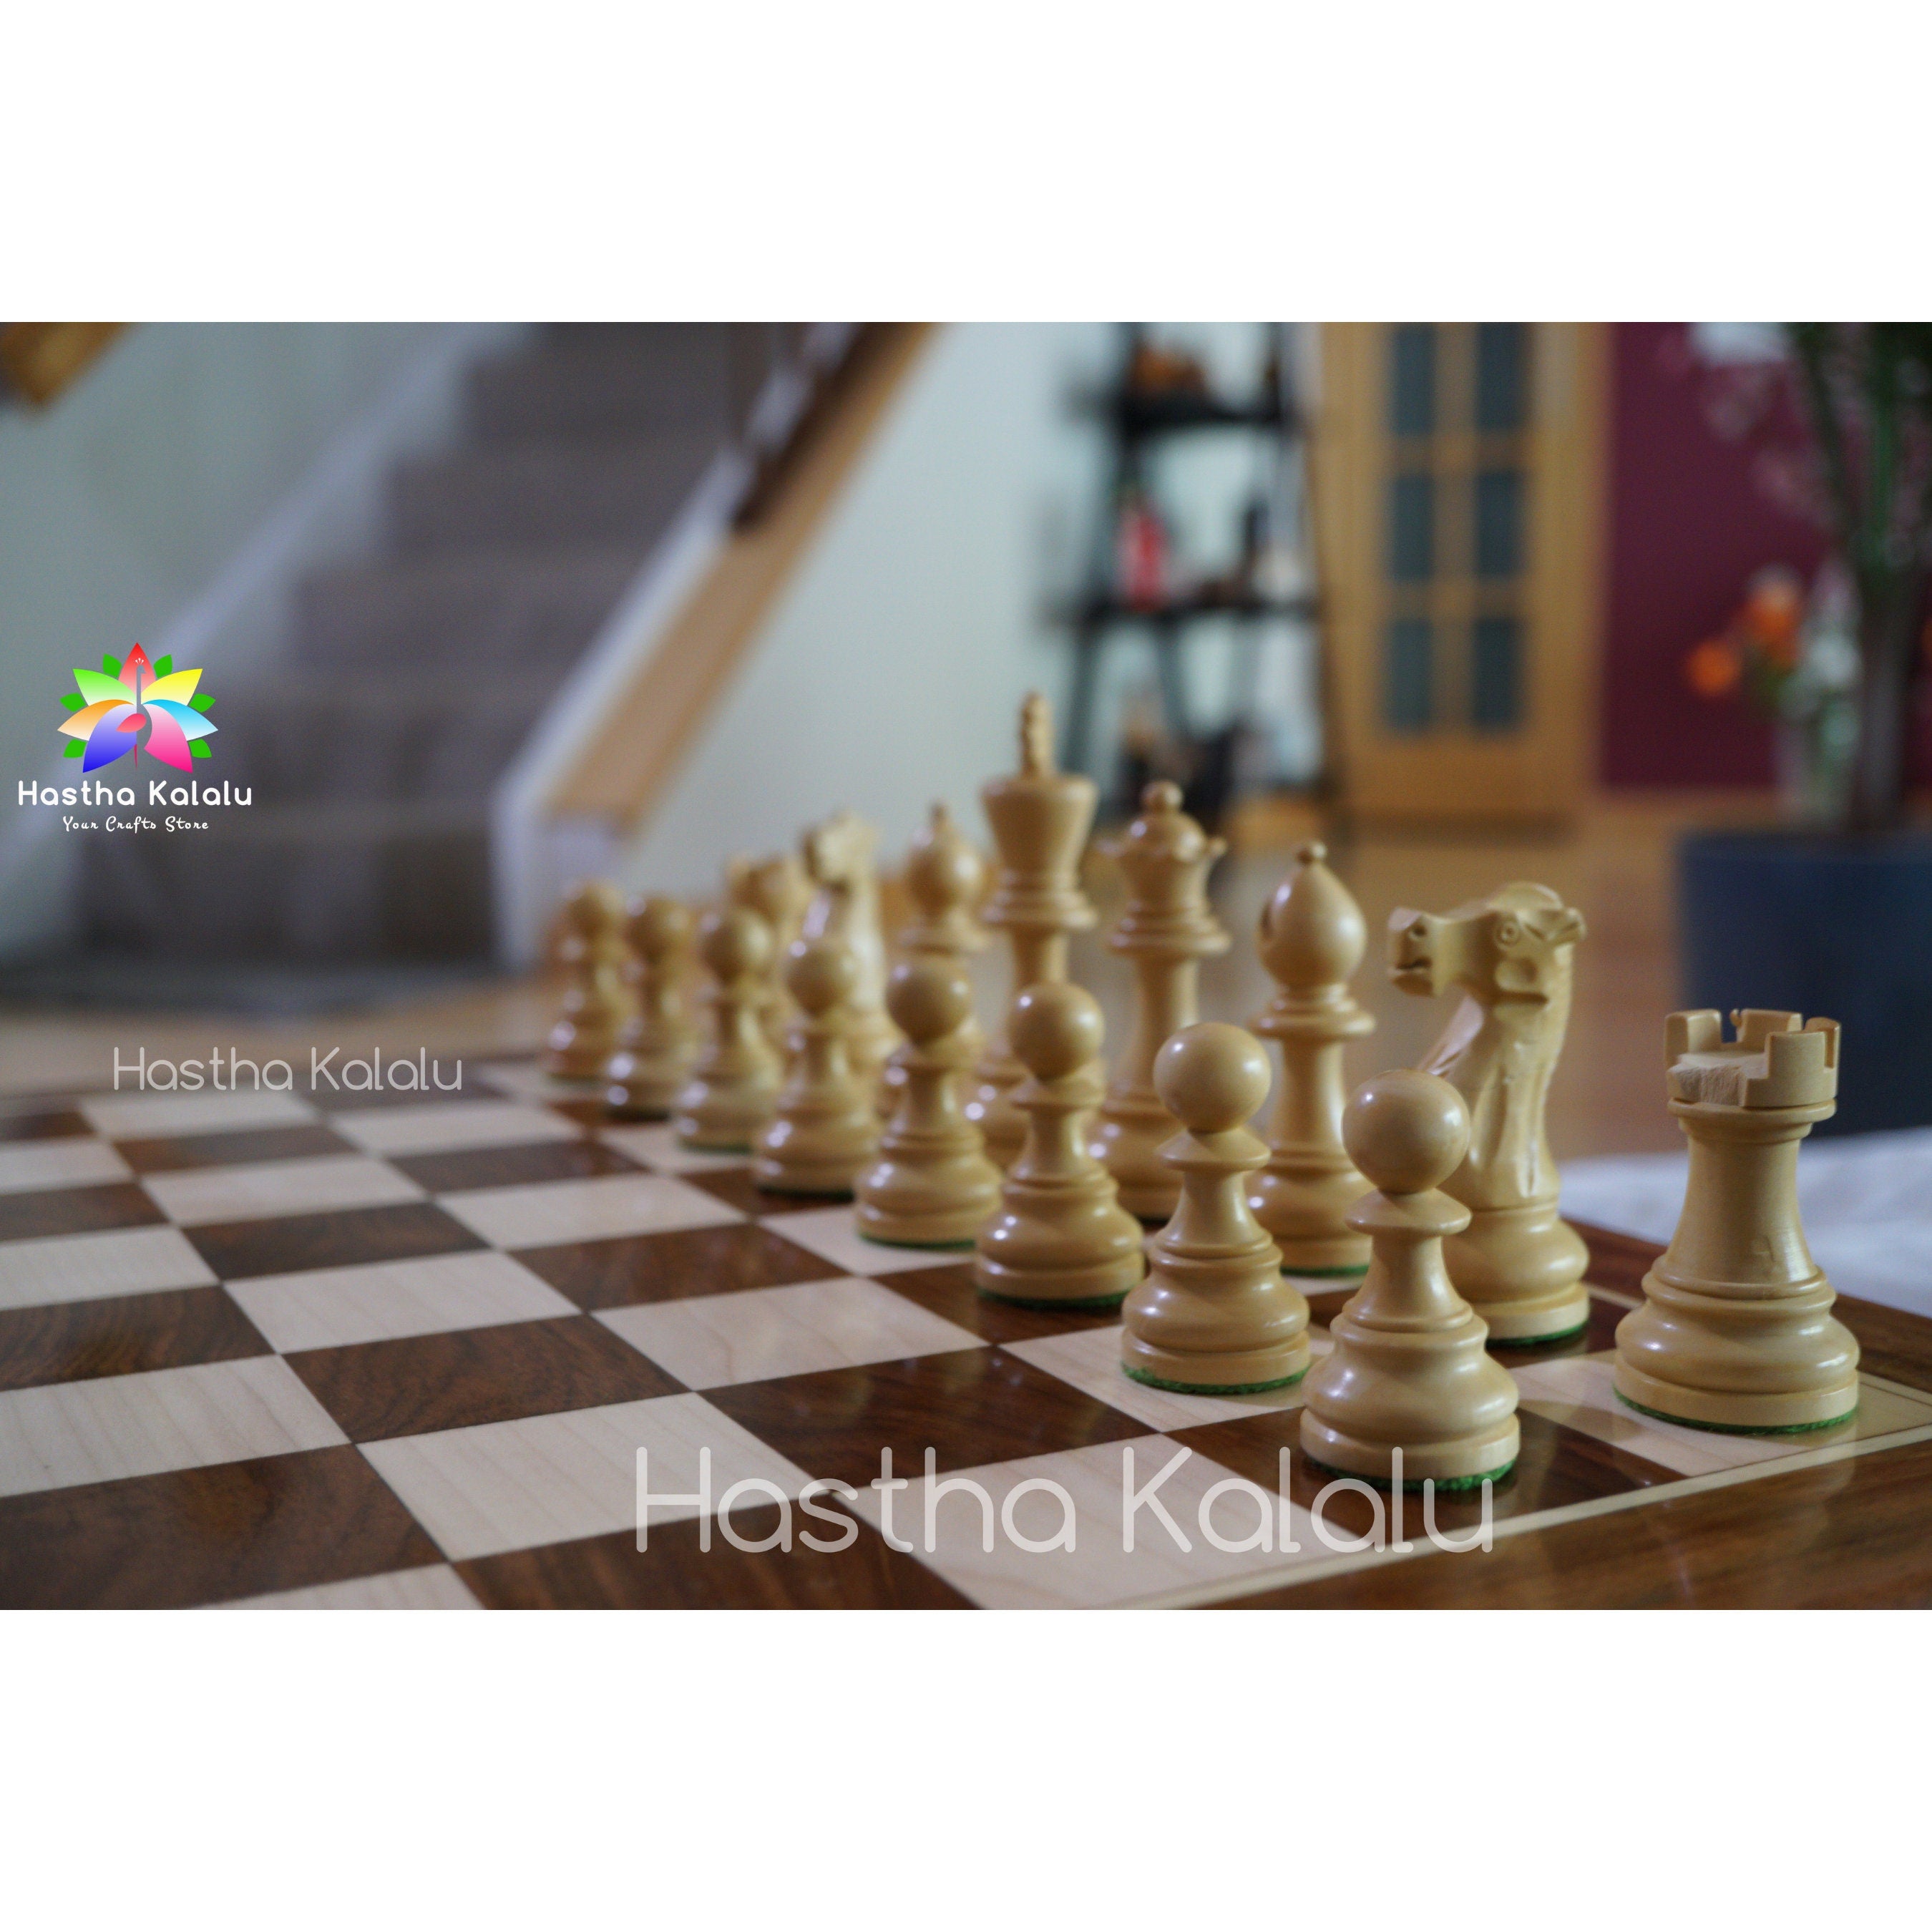 British Staunton Tournament Series Chess set, Weighted Rosewood and Boxwood Chess Pieces